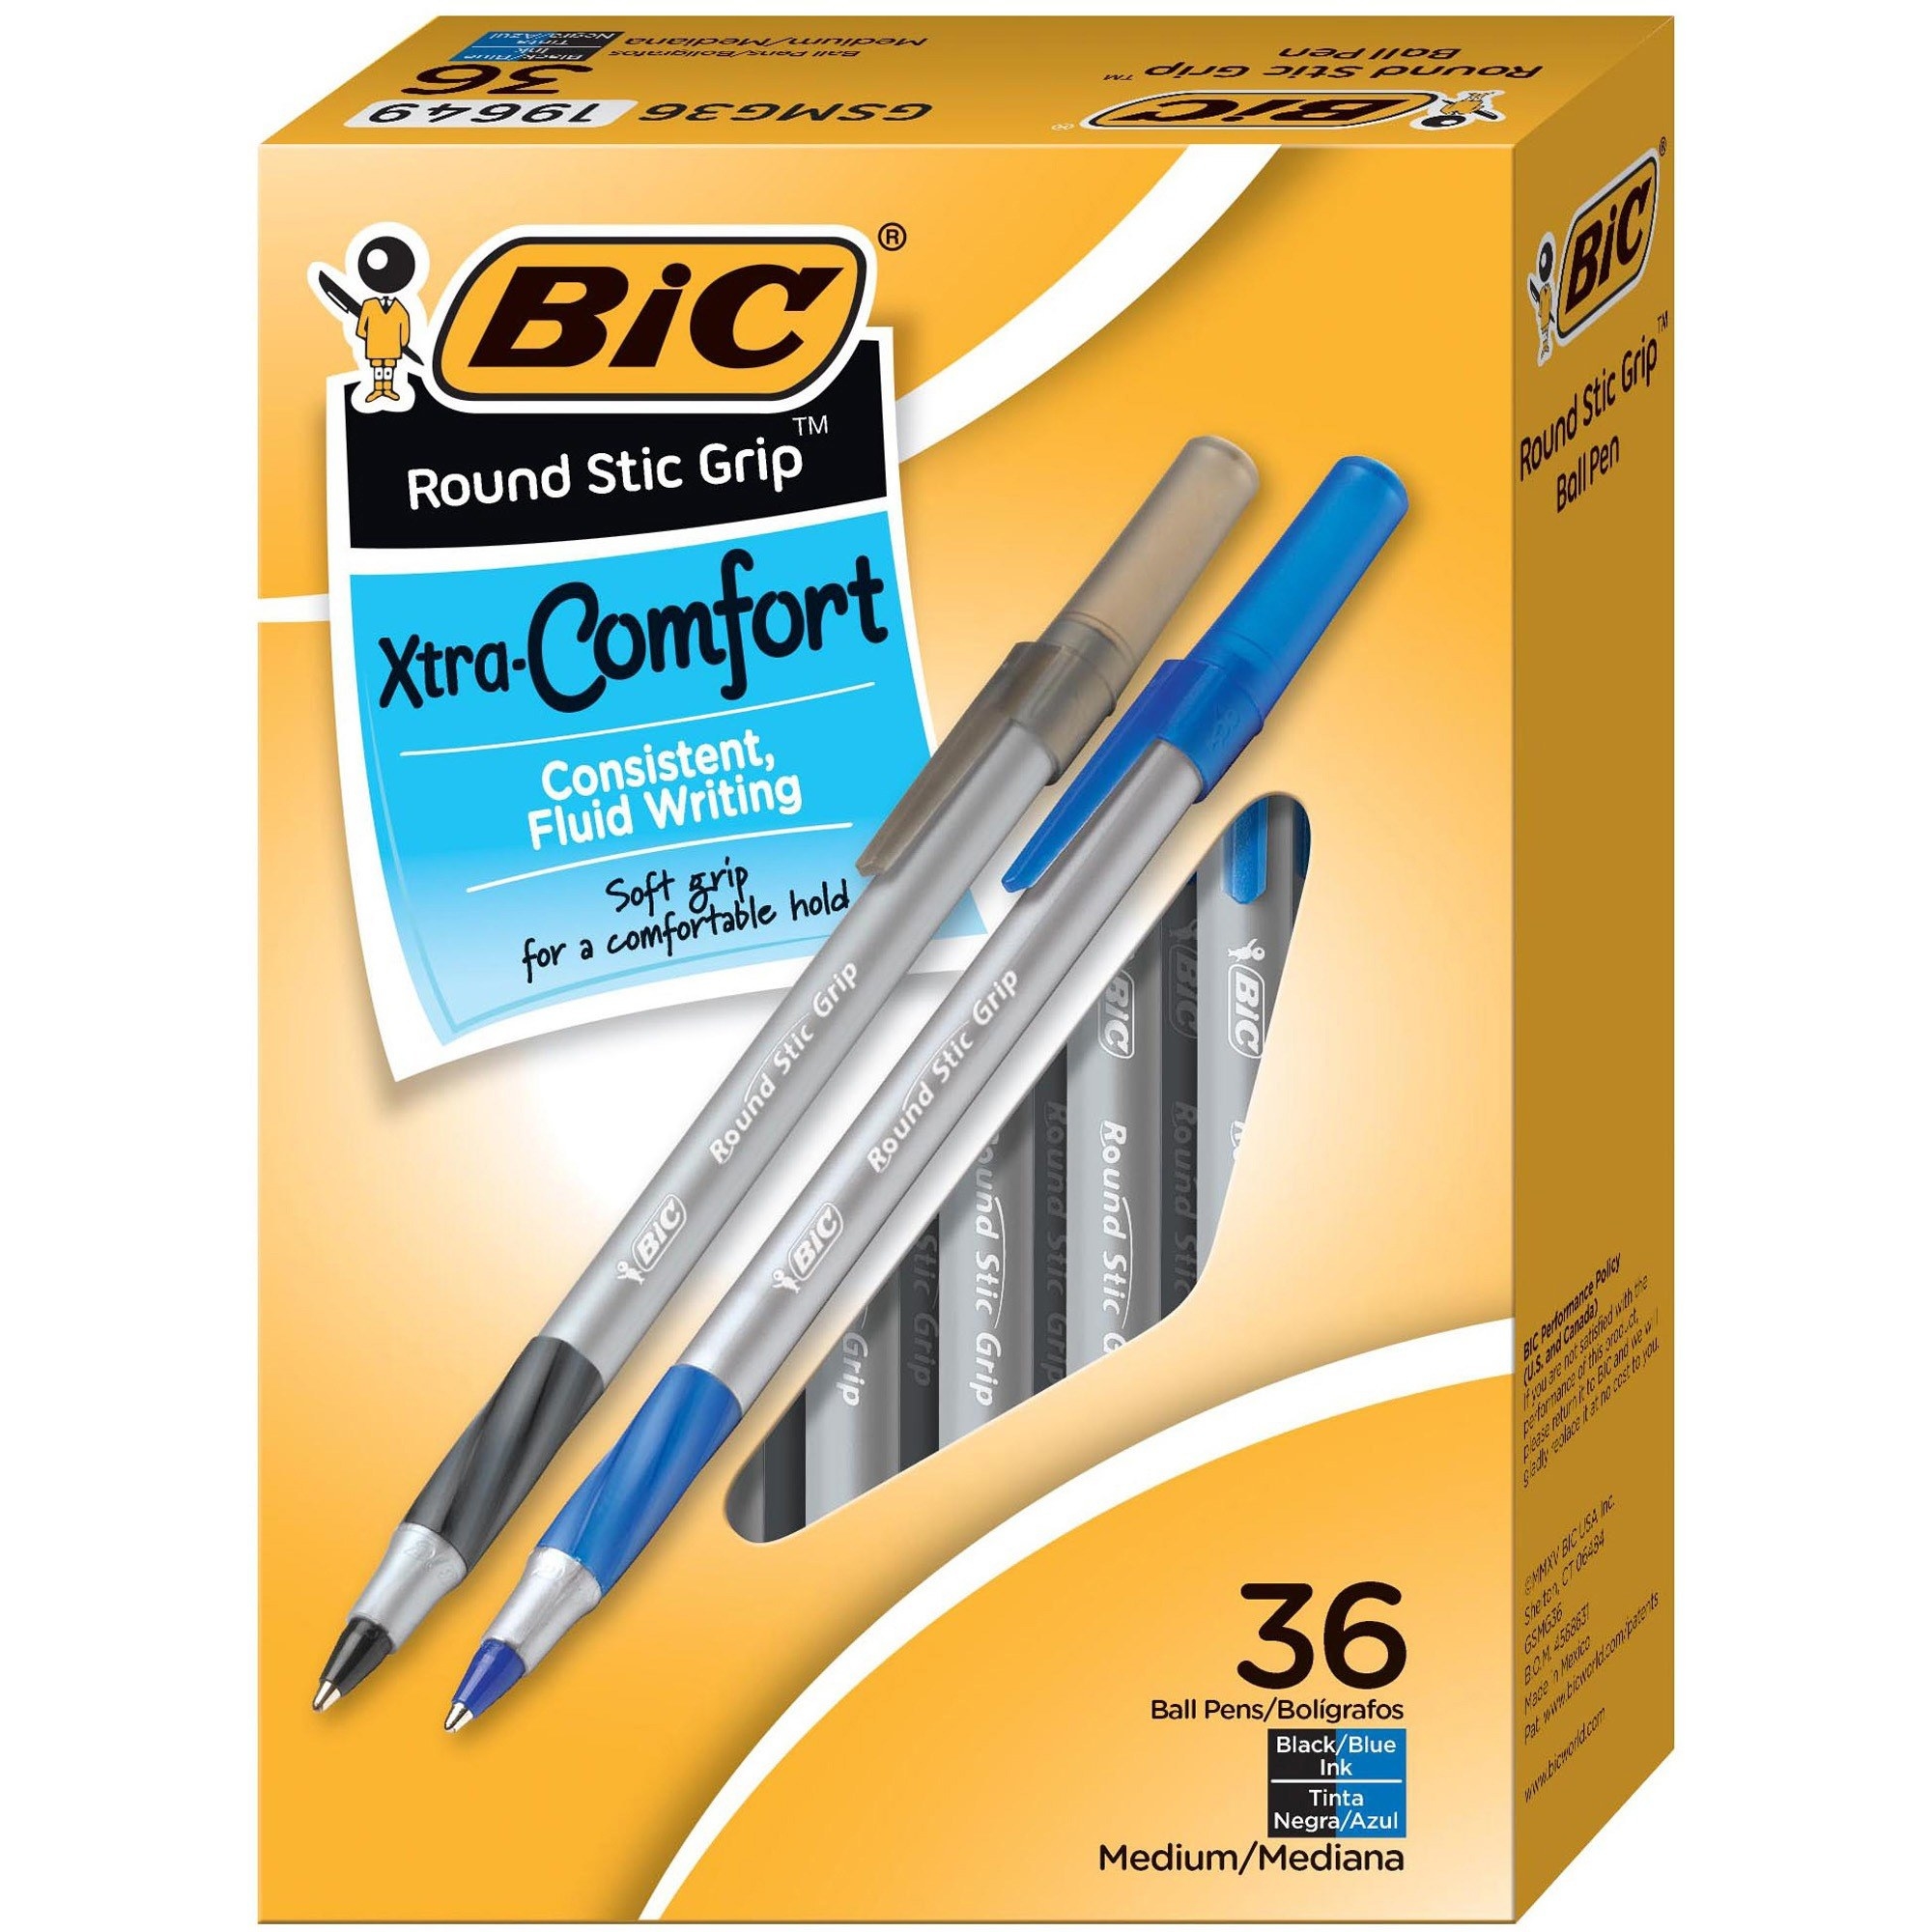 pack of 36 bic ballpoint pens in black and blue